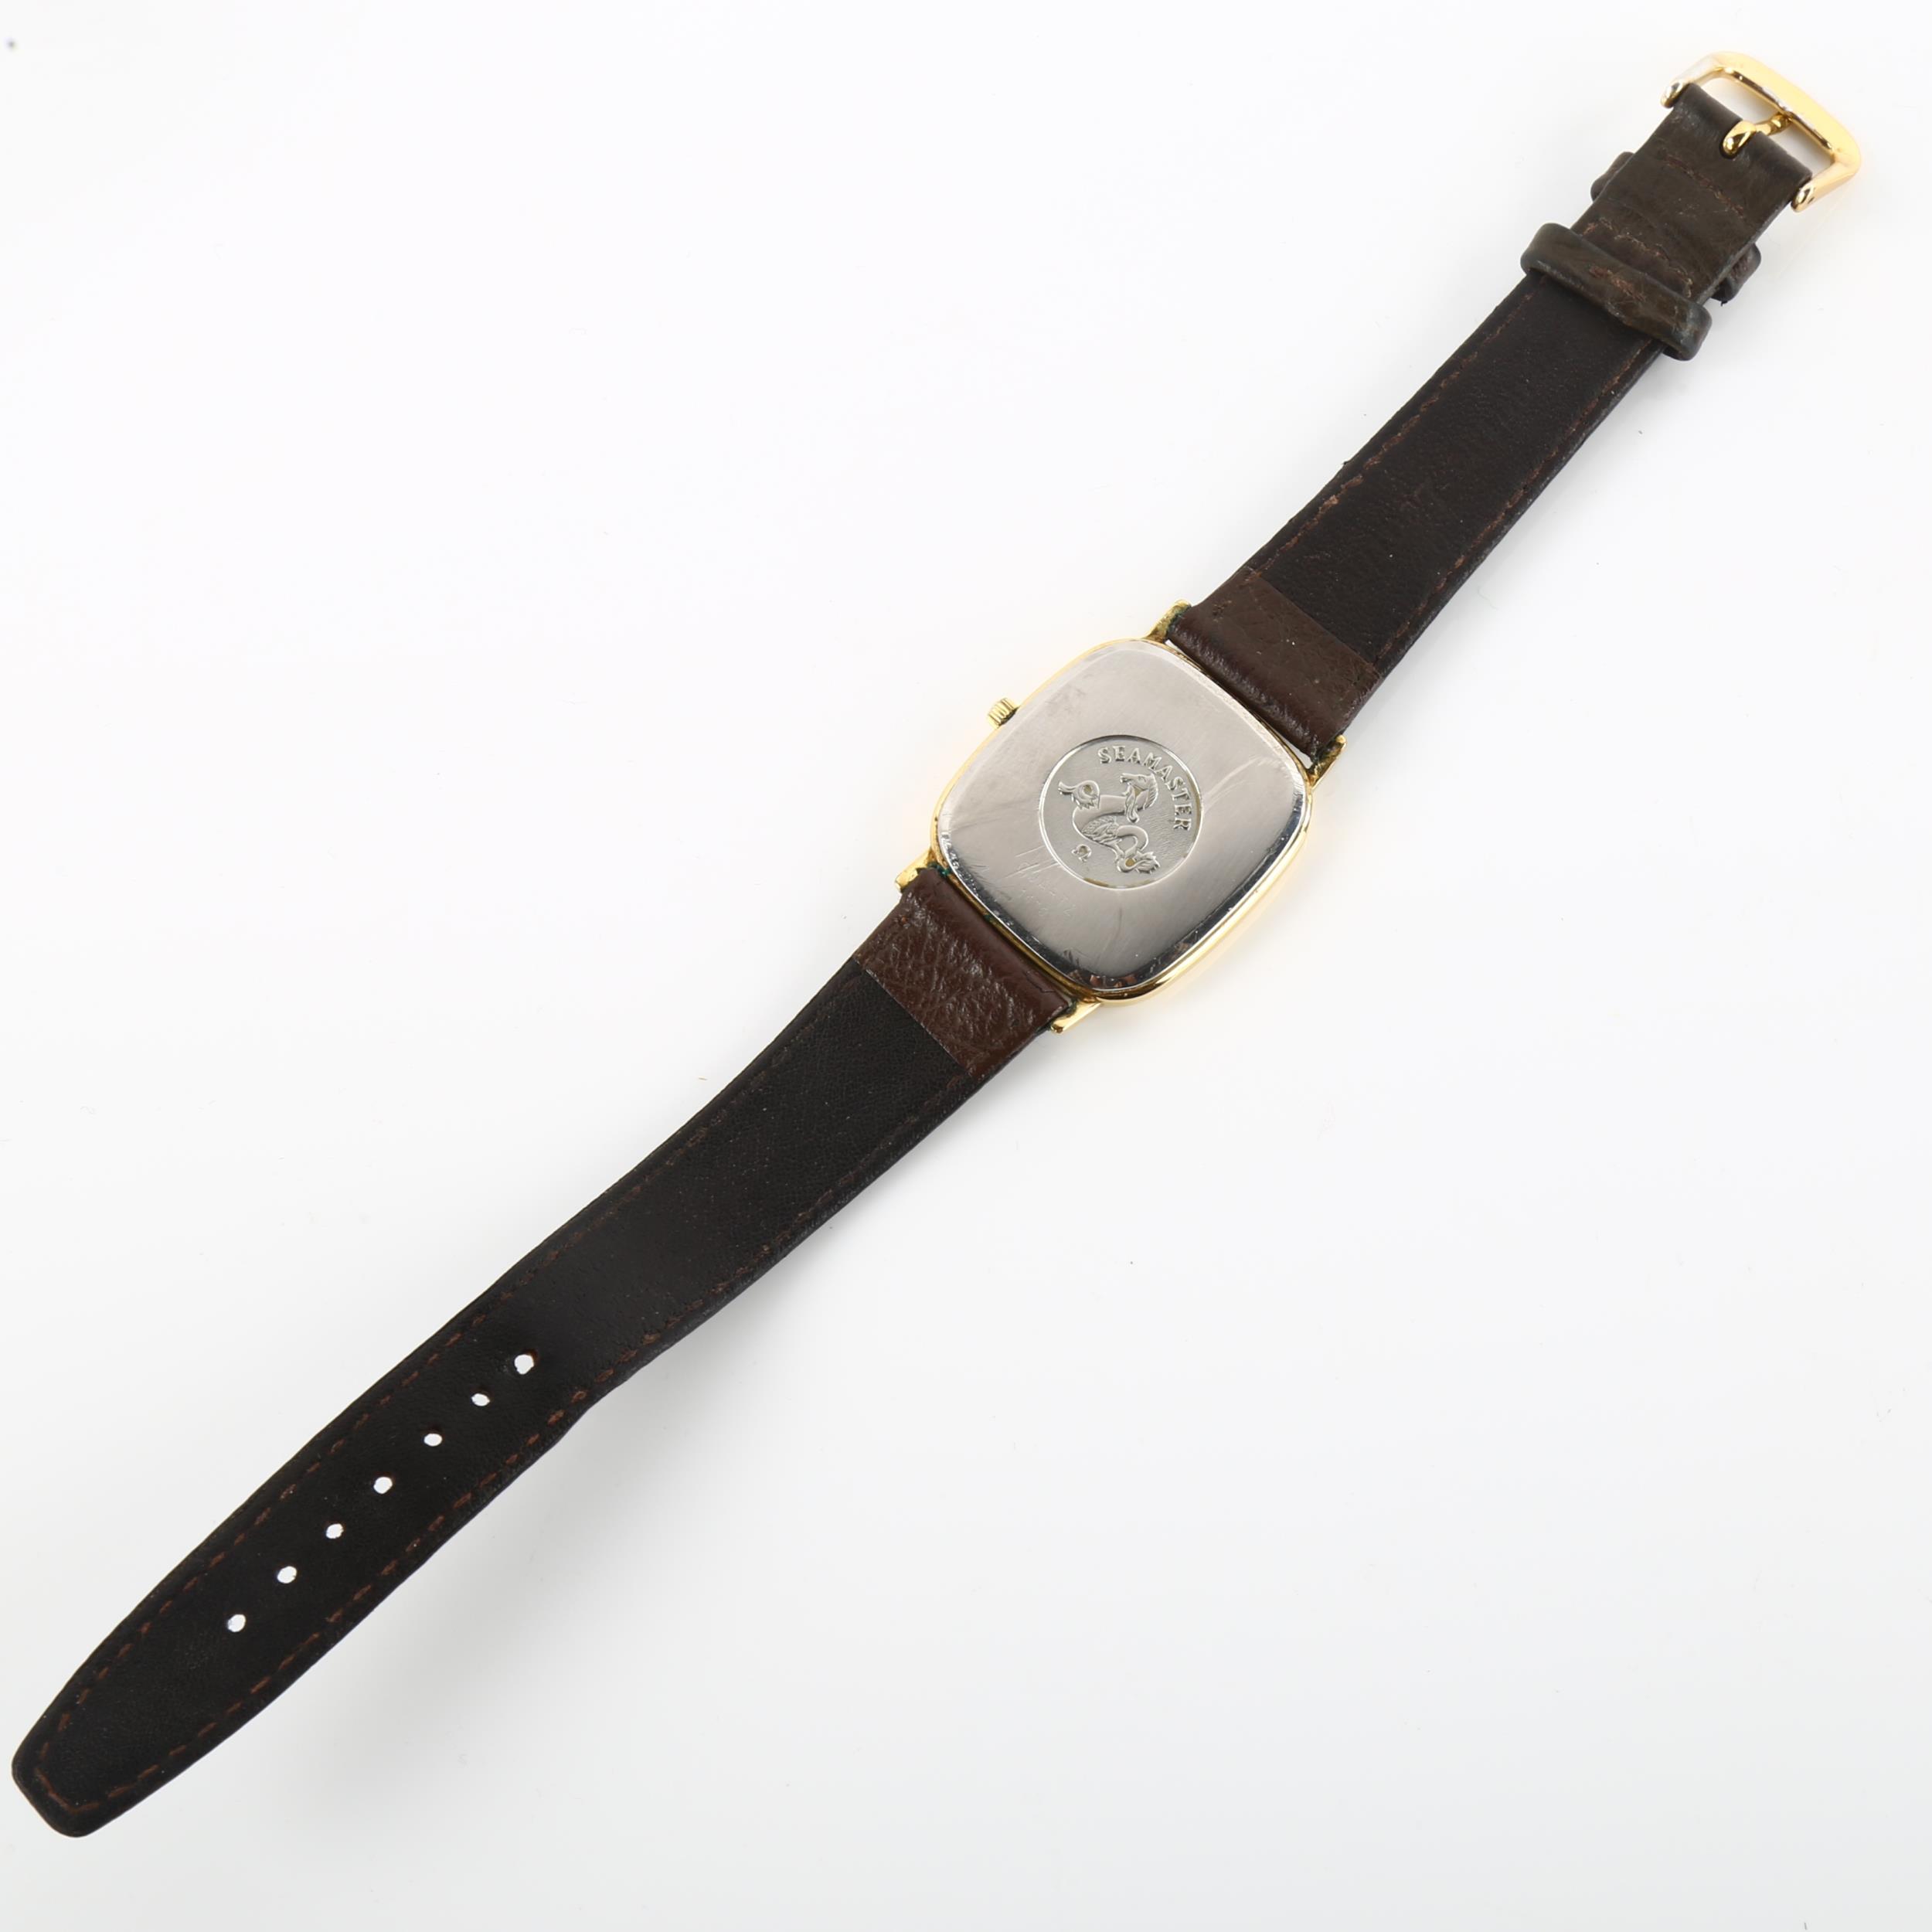 OMEGA - a gold plated stainless steel Seamaster quartz wristwatch, ref. 1430, champagne dial with - Image 3 of 5